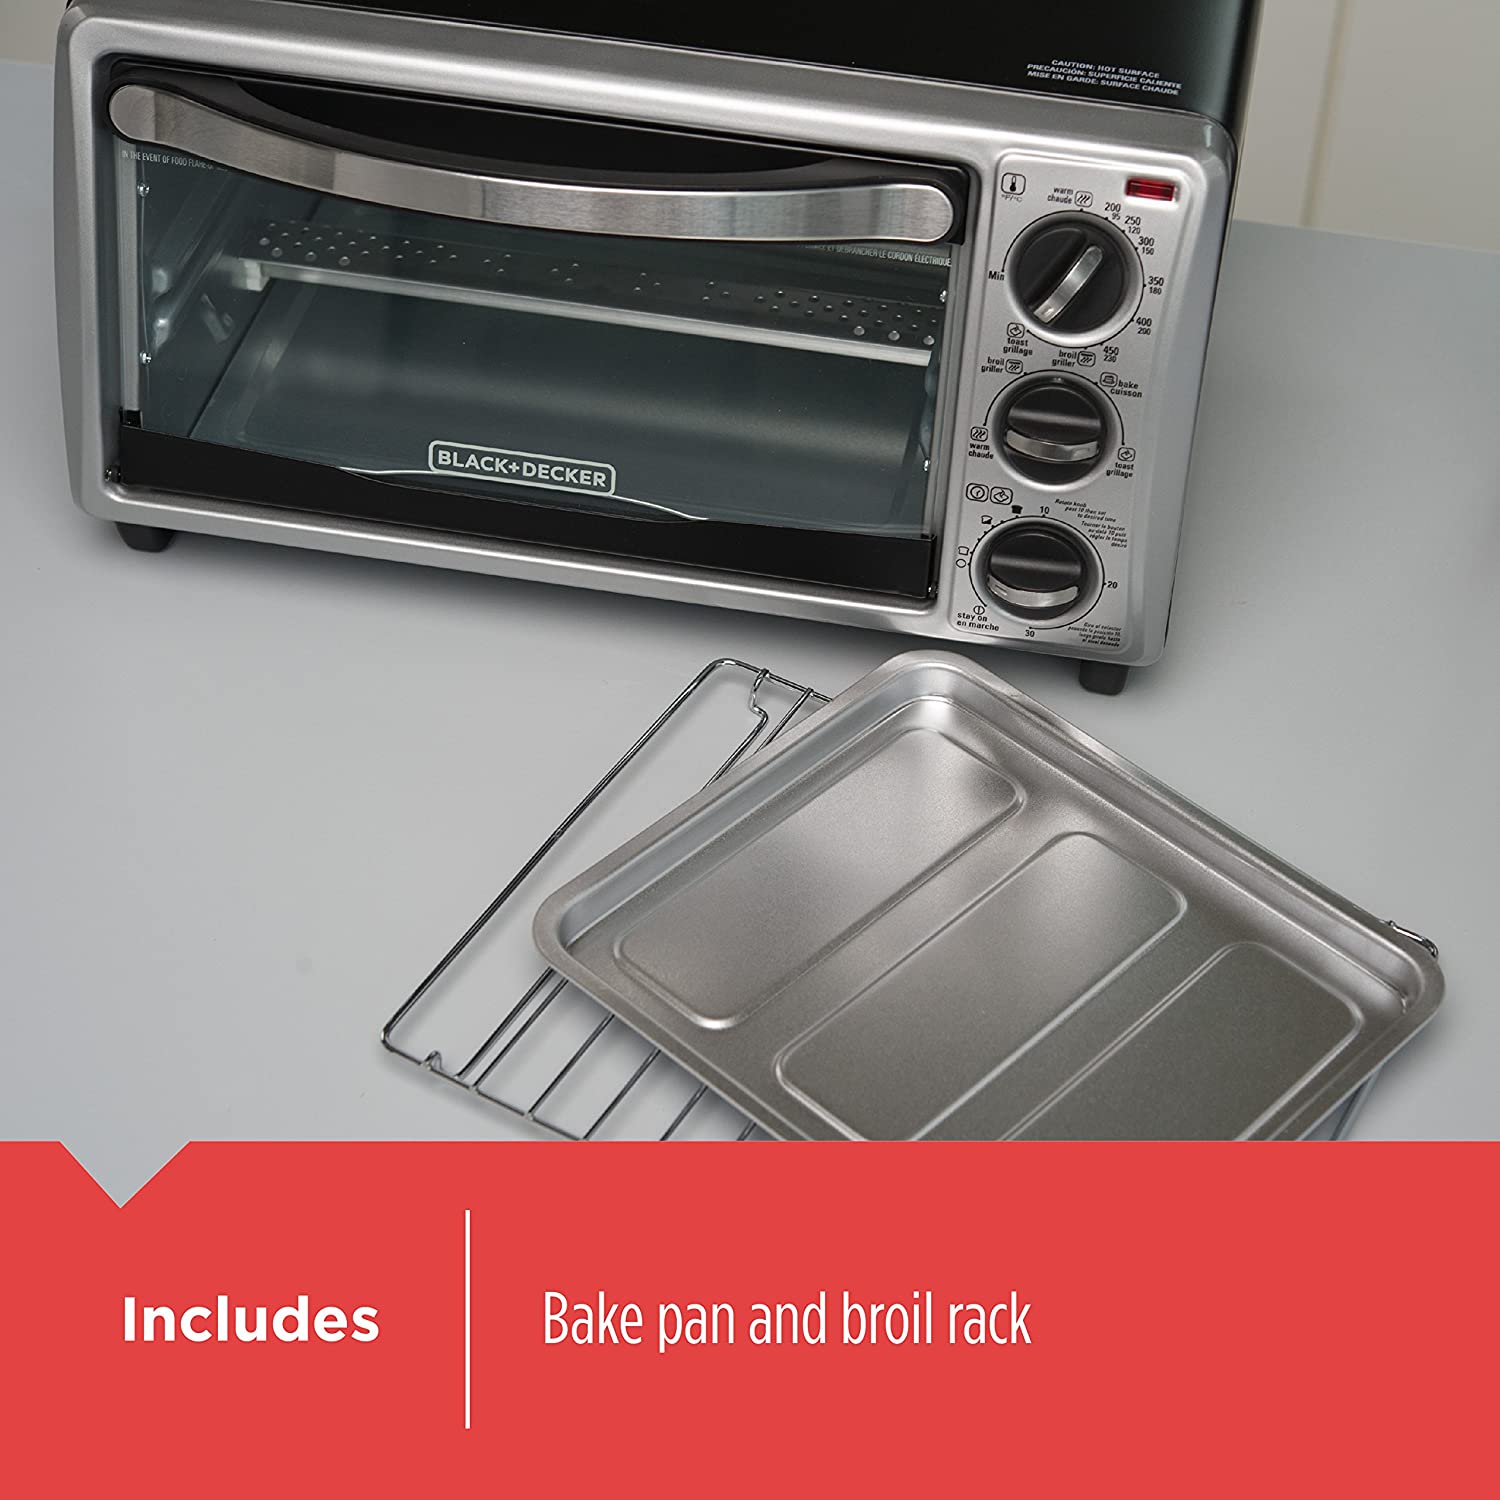 https://discounttoday.net/wp-content/uploads/2022/09/BLACKDECKER-4-Slice-Convection-Oven-Stainless-Steel-Curved-Interior-fits-a-9-inch-Pizza-TO1313SBD2.jpg